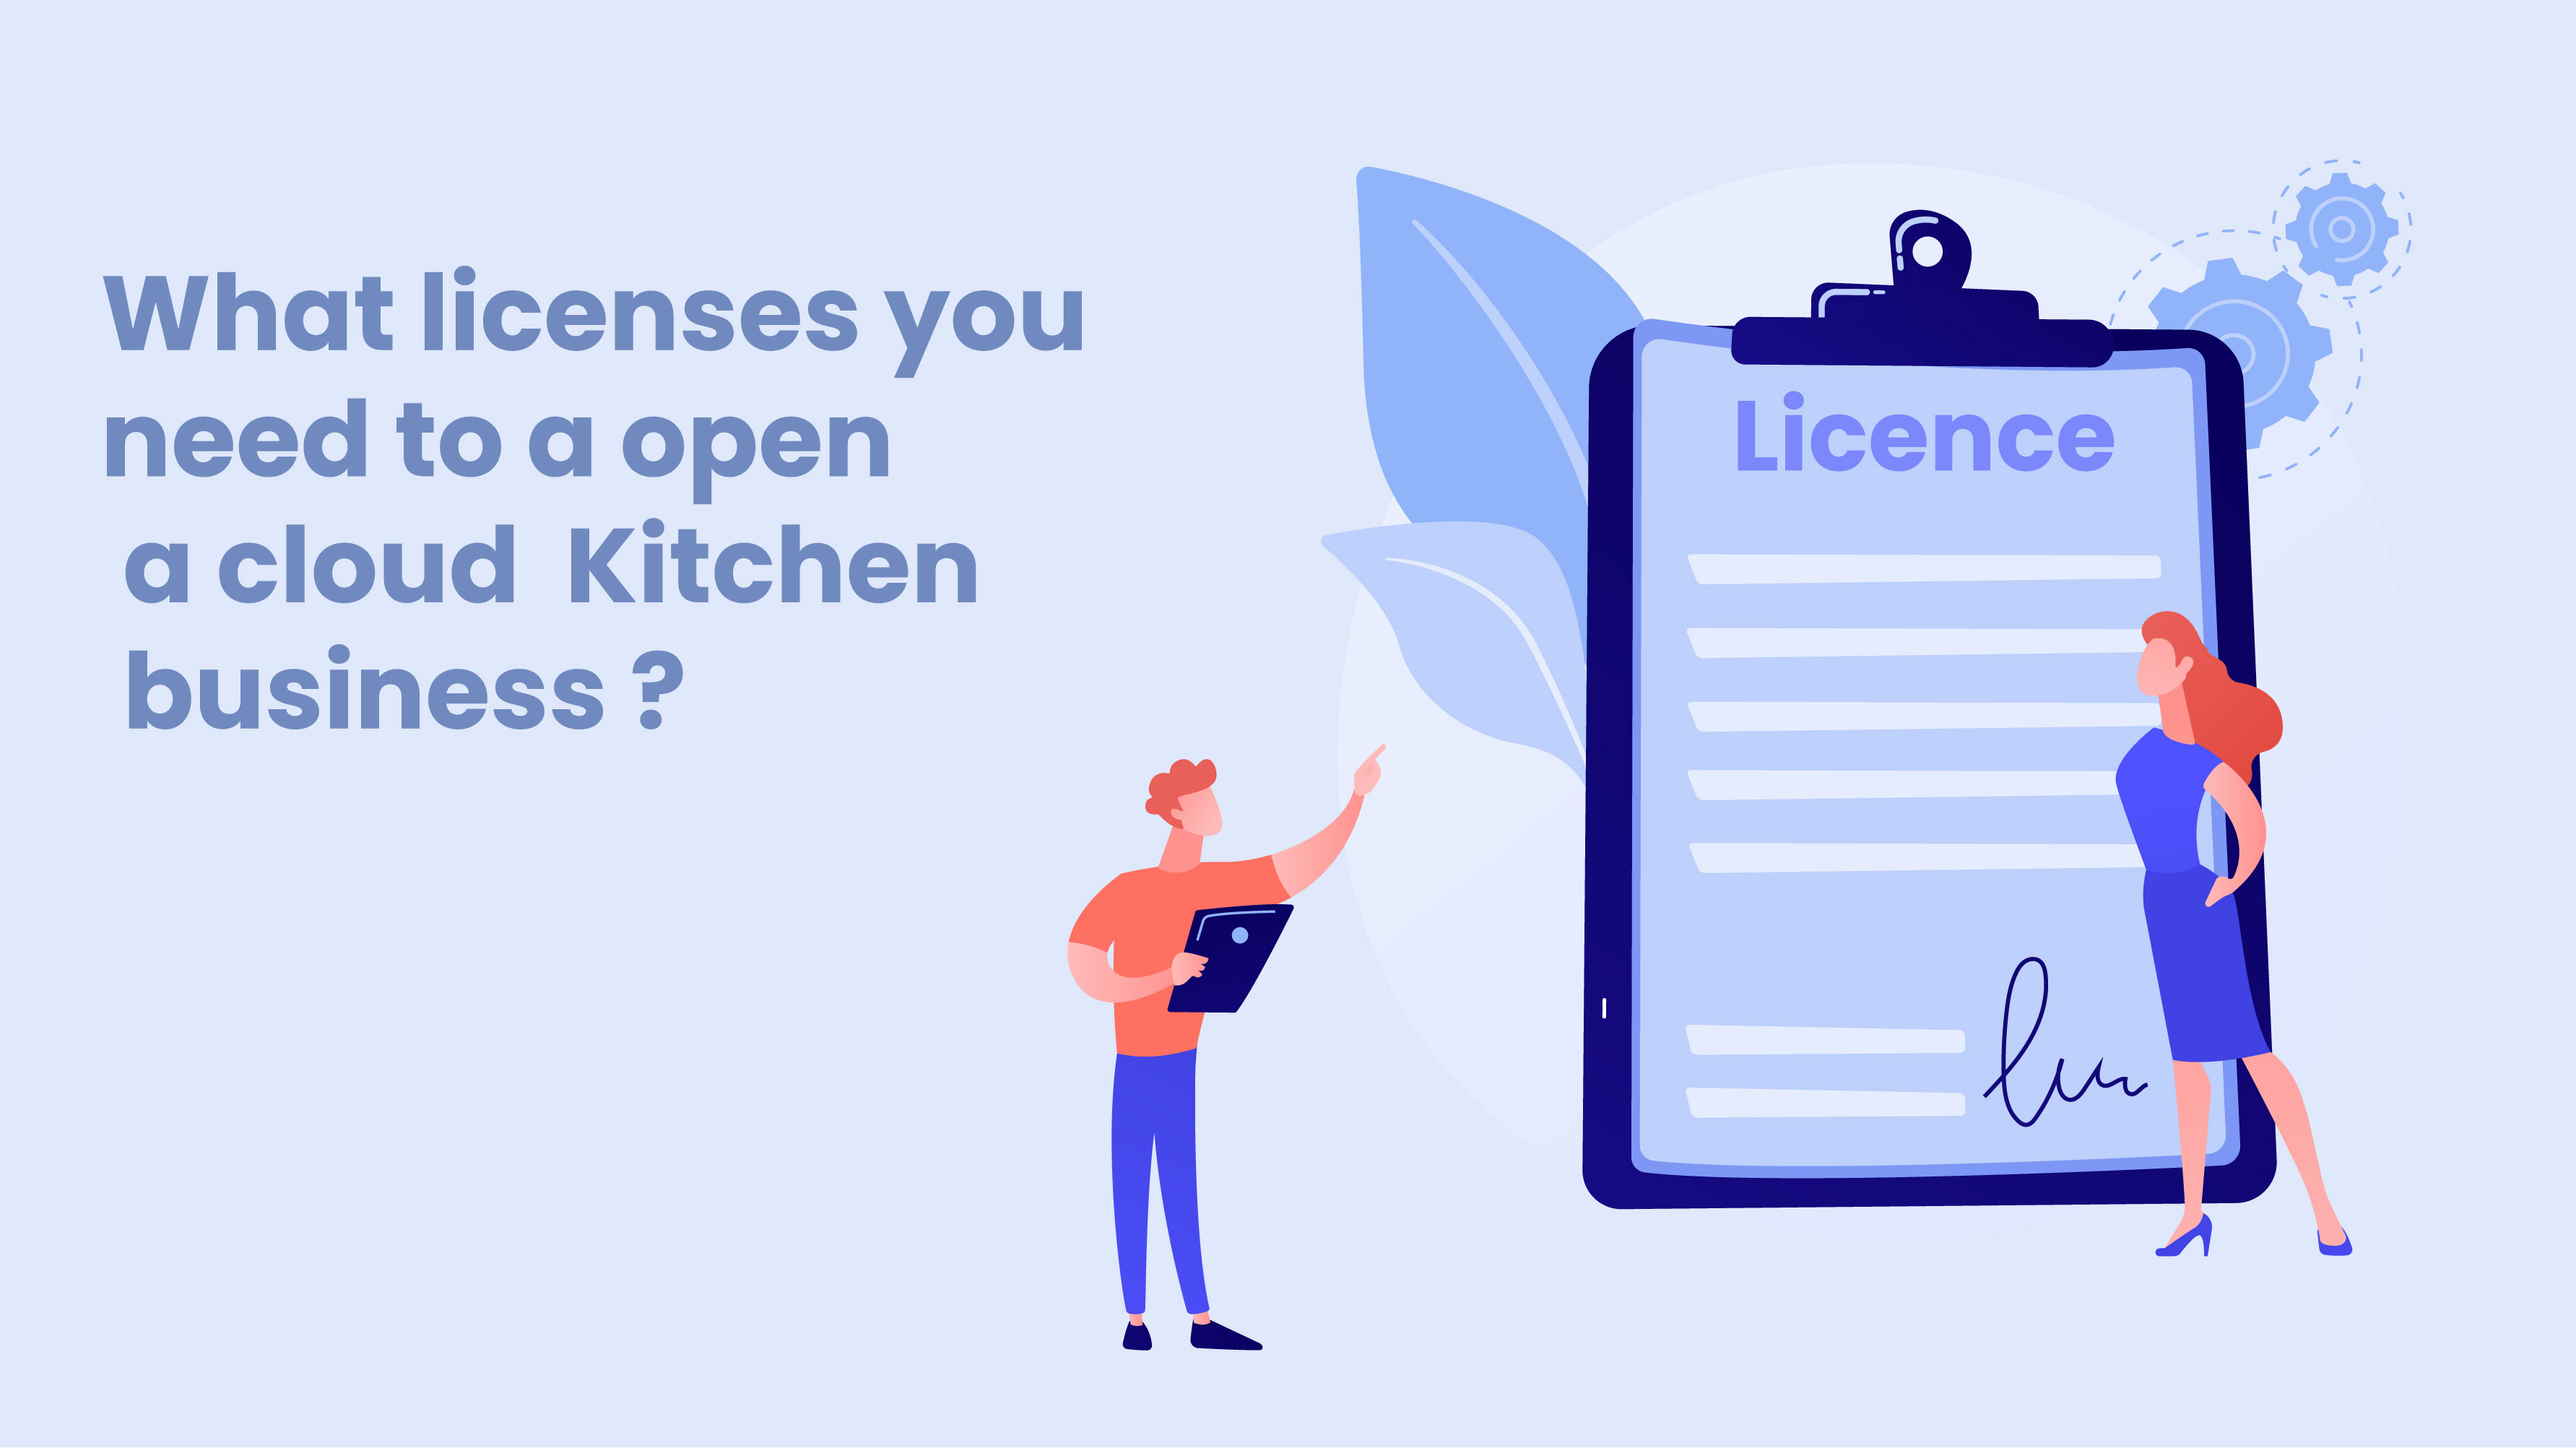 What licenses you need to open a cloud kitchen business ?